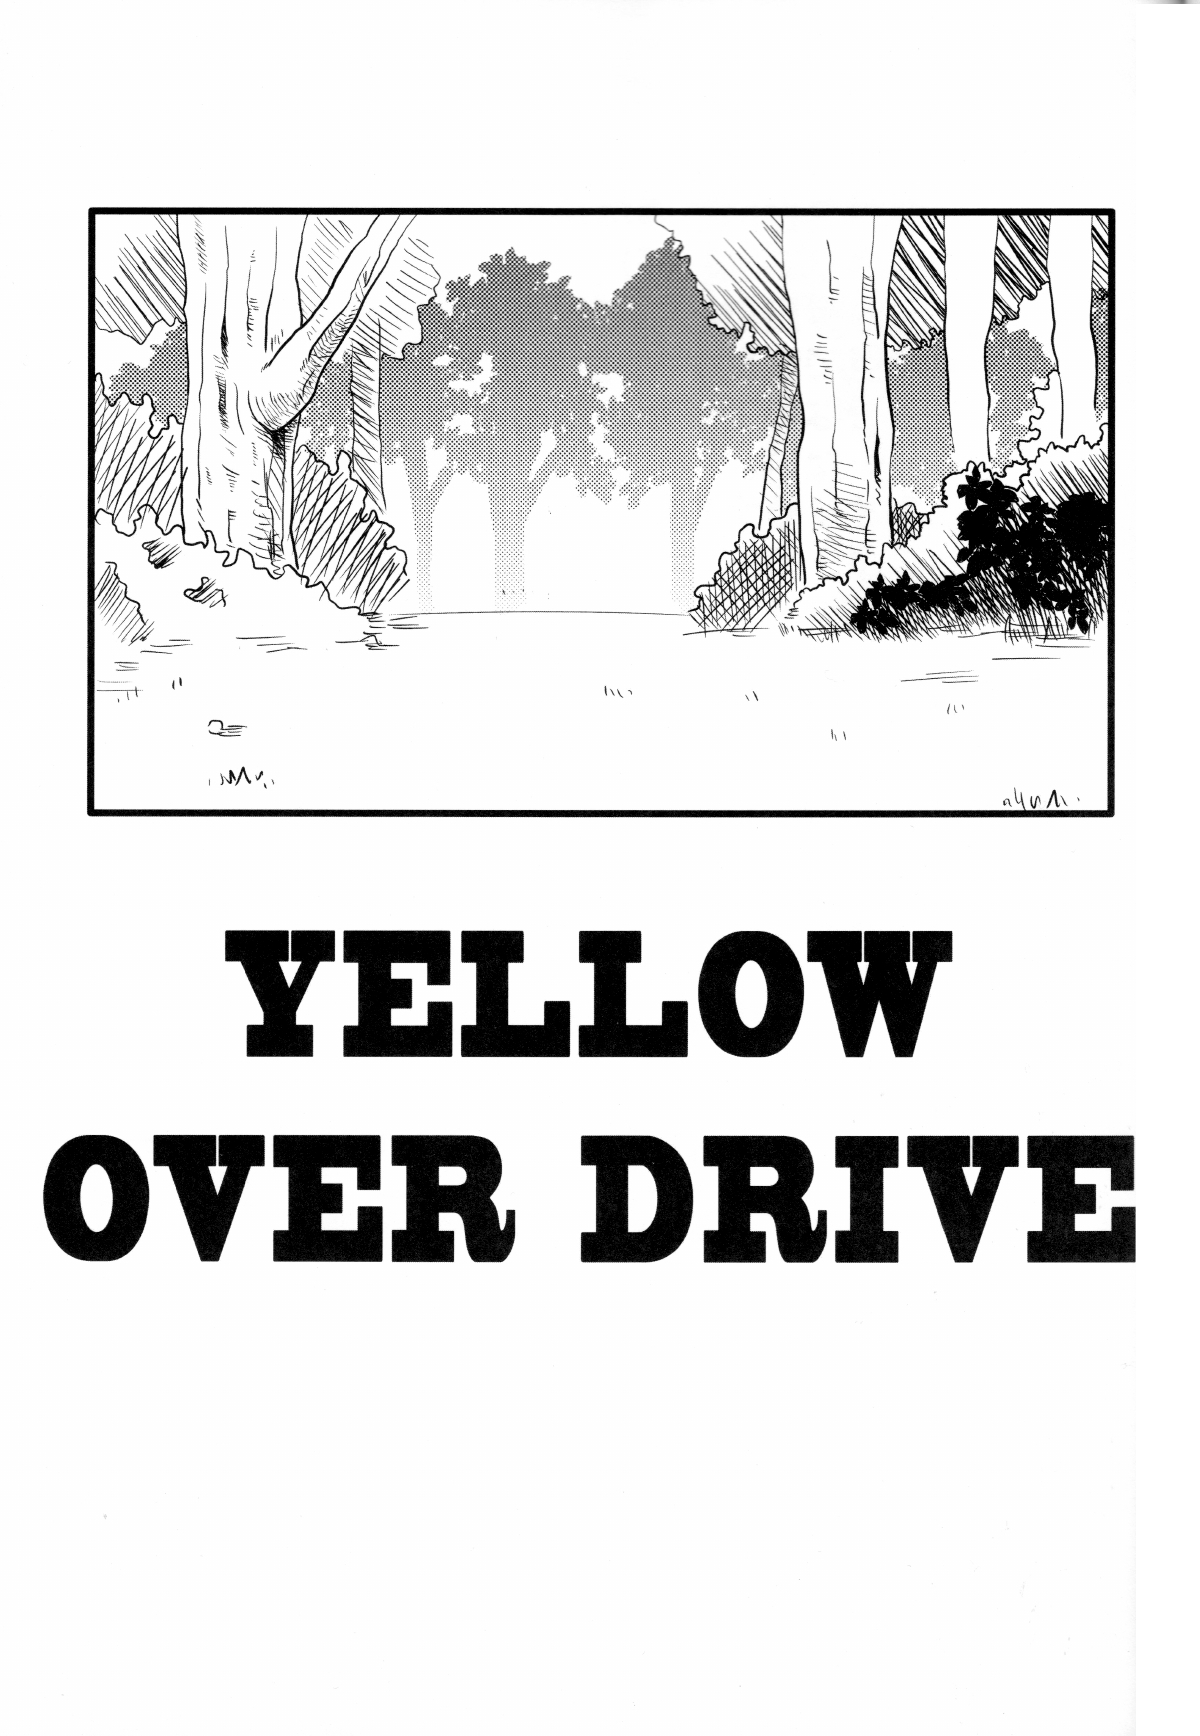 [RYCANTHROPY (水樹凱)] YELLOW OVER DRIVE